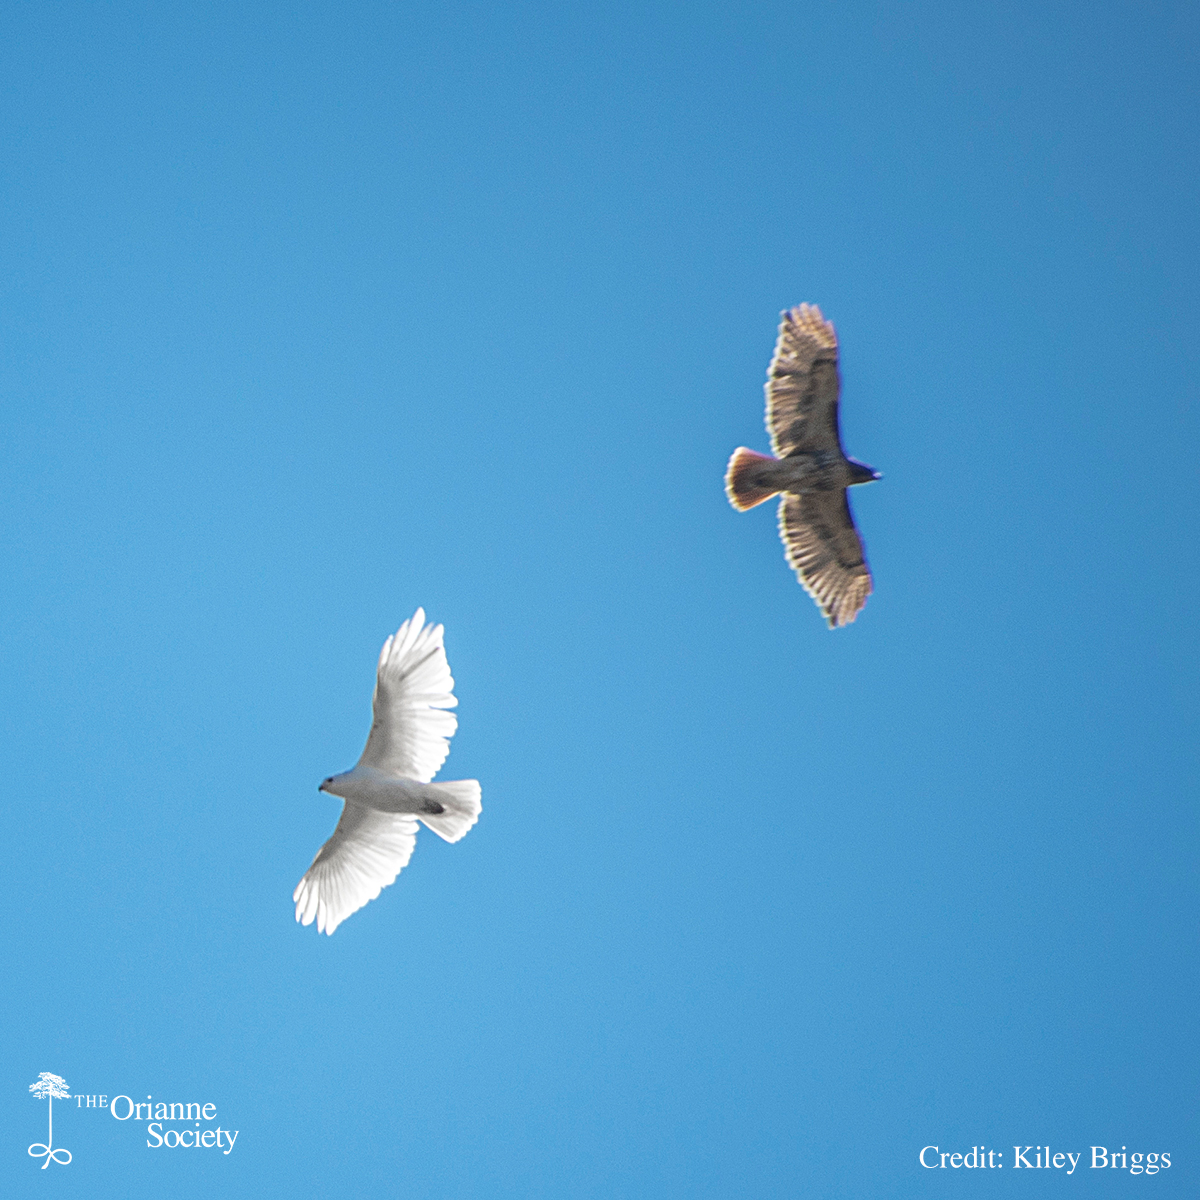 While scoping out a new site to potentially do some turtle surveys, Kiley noticed something unusual about one of the Red-tailed Hawks circling above. #OrianneSociety #KileyBriggs #FacesoftheForest #birds #hawk #redtailedhawk #birdsofprey #leucistic